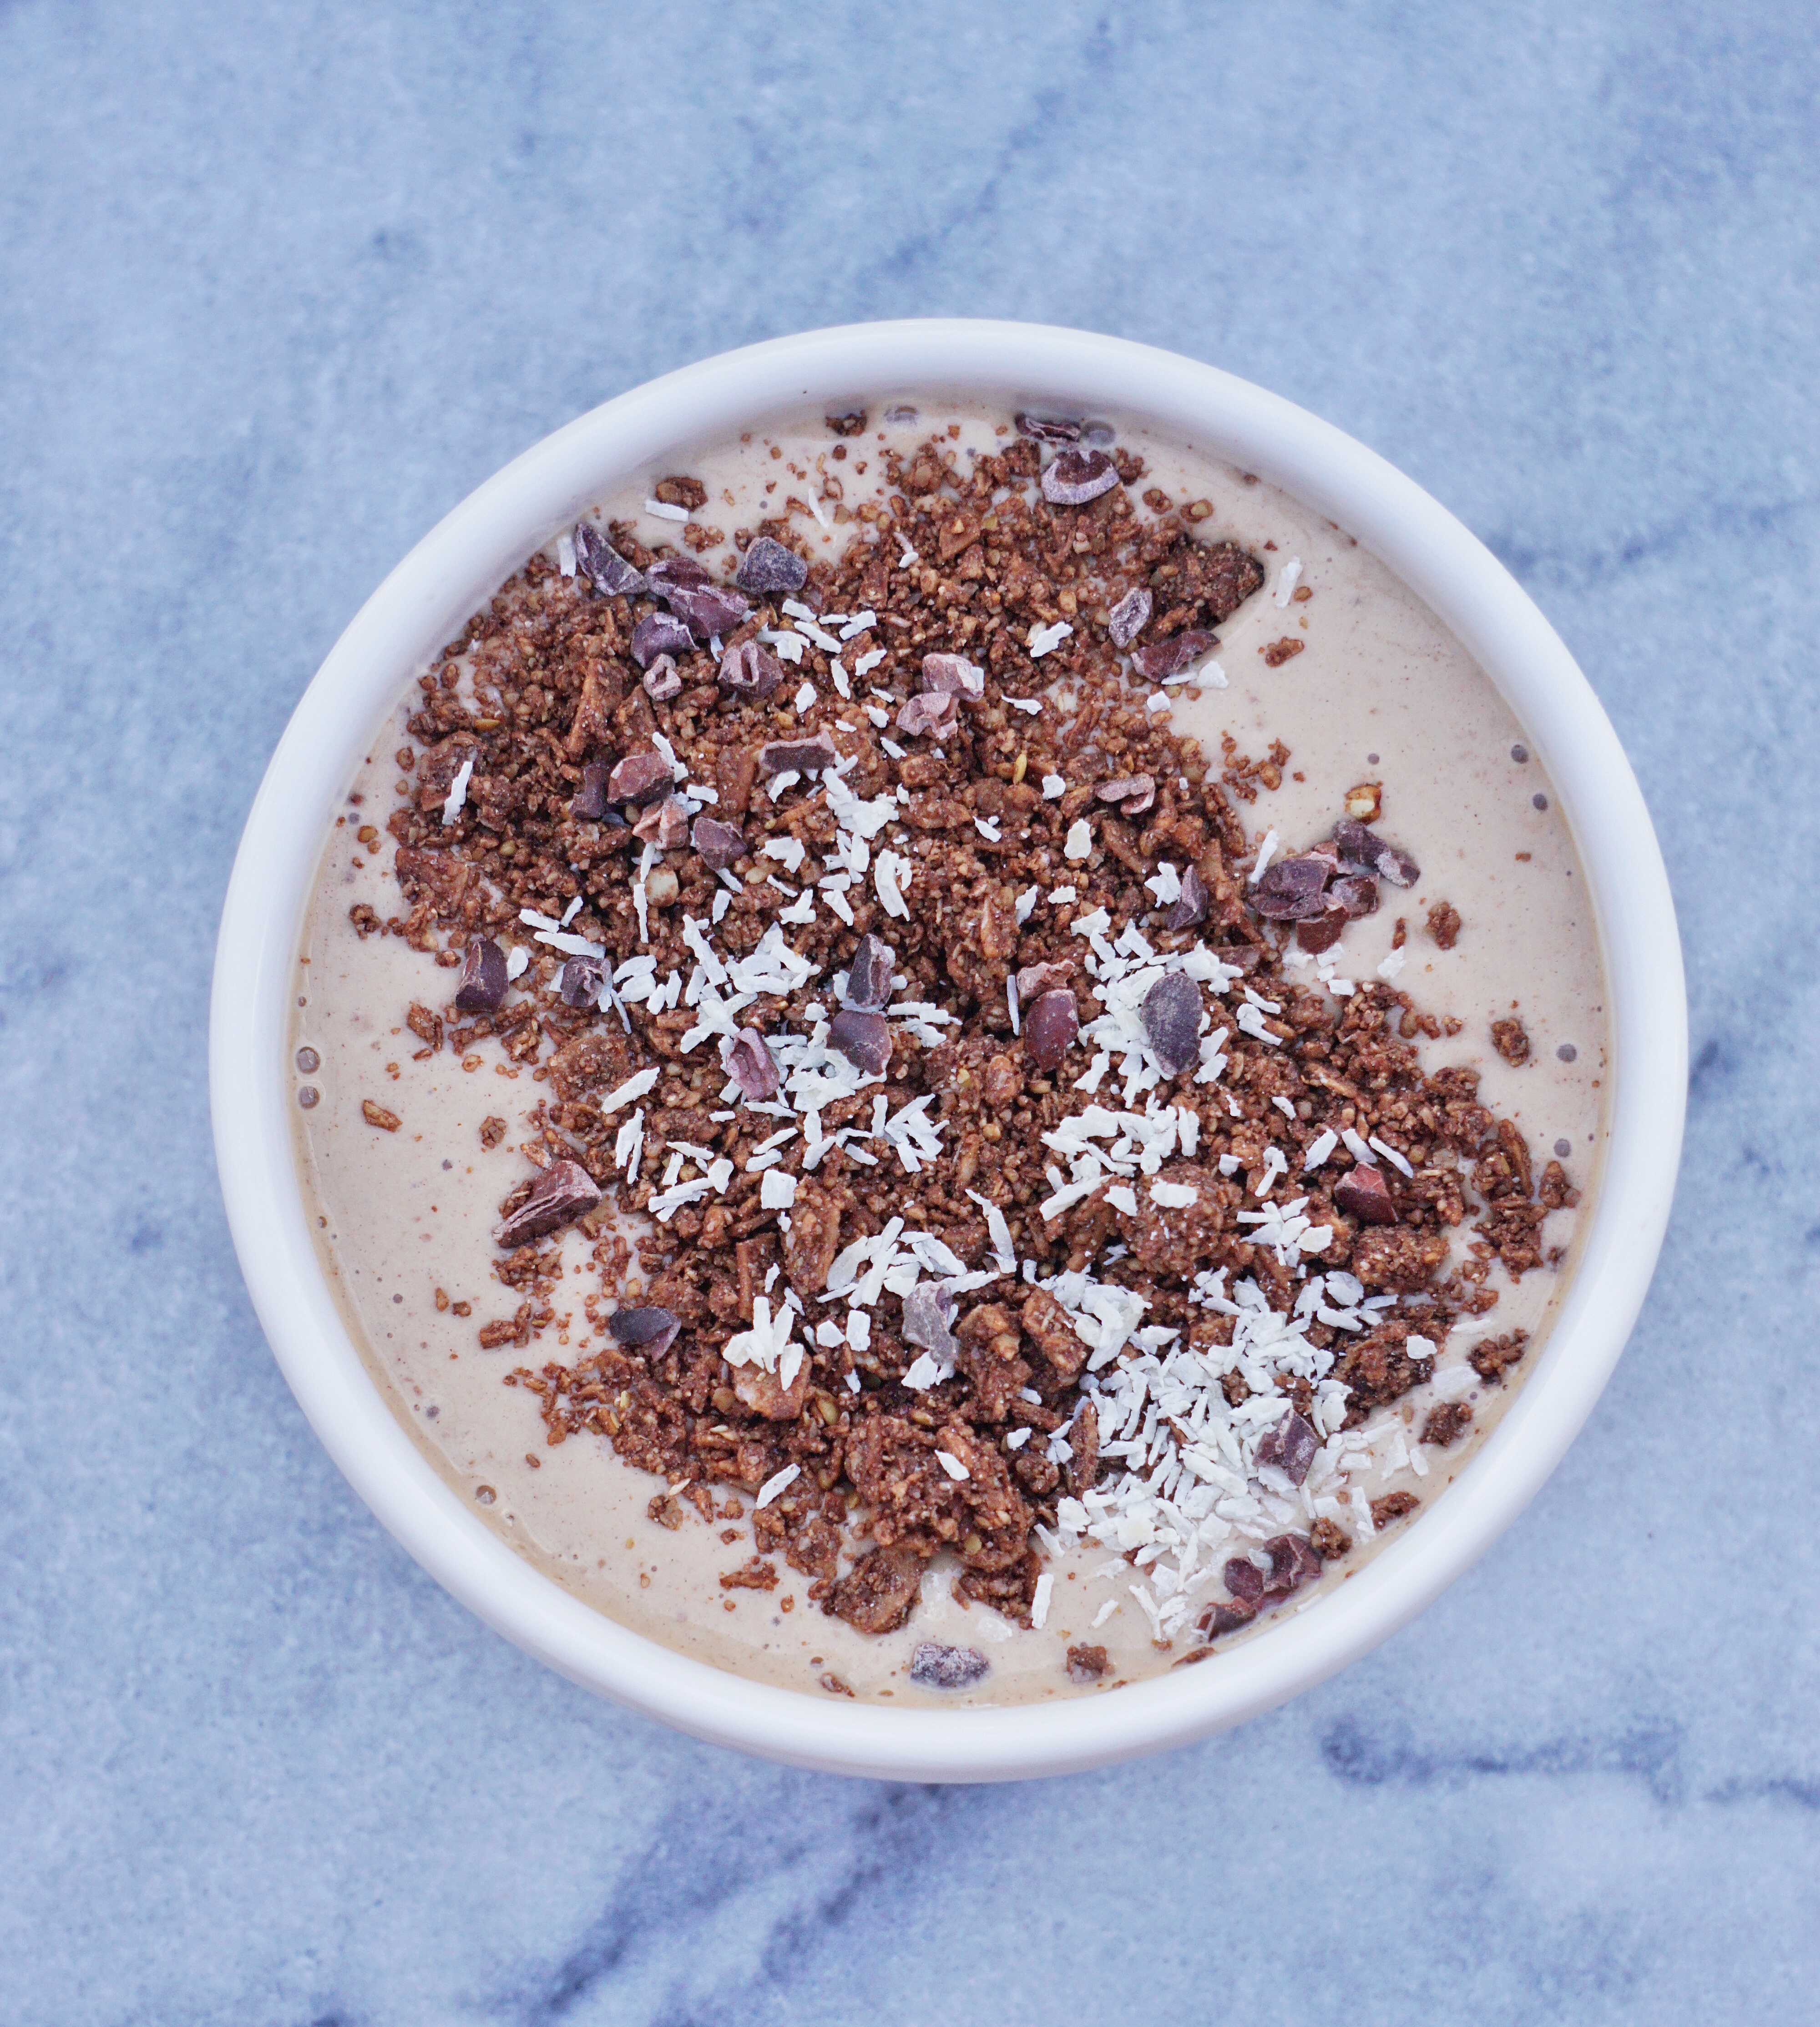 Chocolate Peanut Butter Smoothie Bowl Leahs Plate - Chocolate Peanut Butter Smoothie Bowl